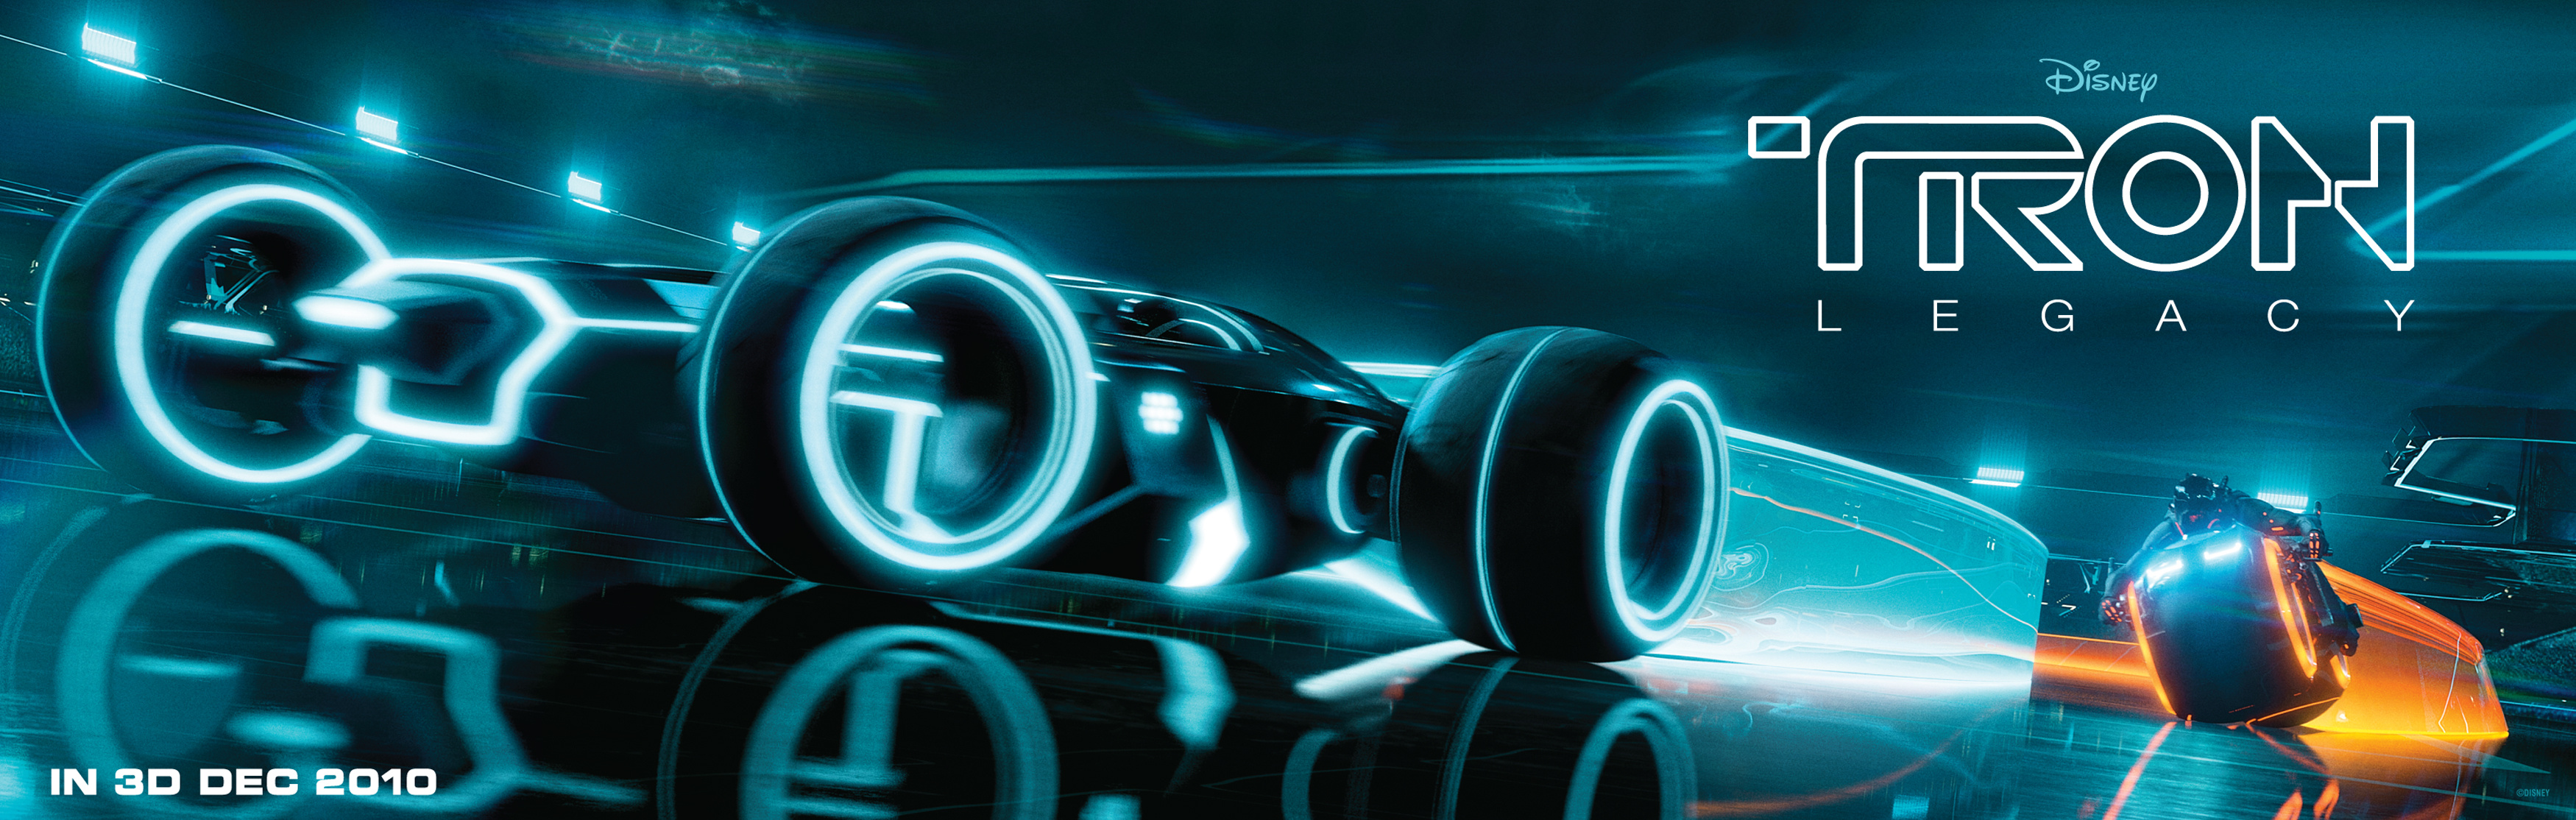 Tron (Movie): The film grossed $400 million against a $170 million budget. 3500x1120 Dual Screen Background.